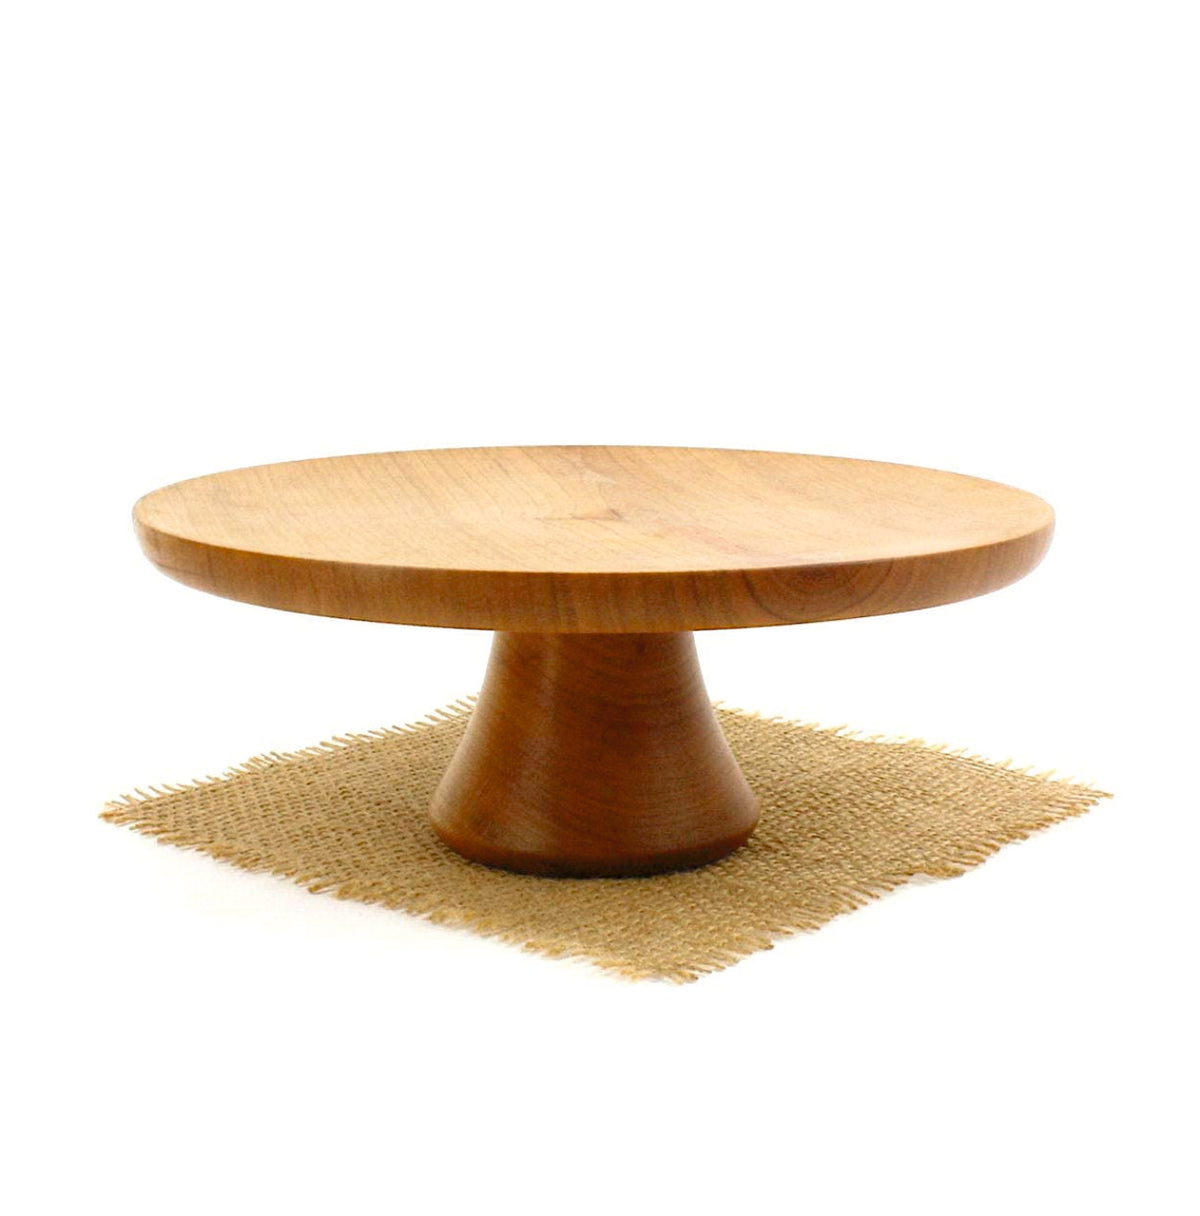 Natural Wooden Handcrafted Cake Stand - 10 inch